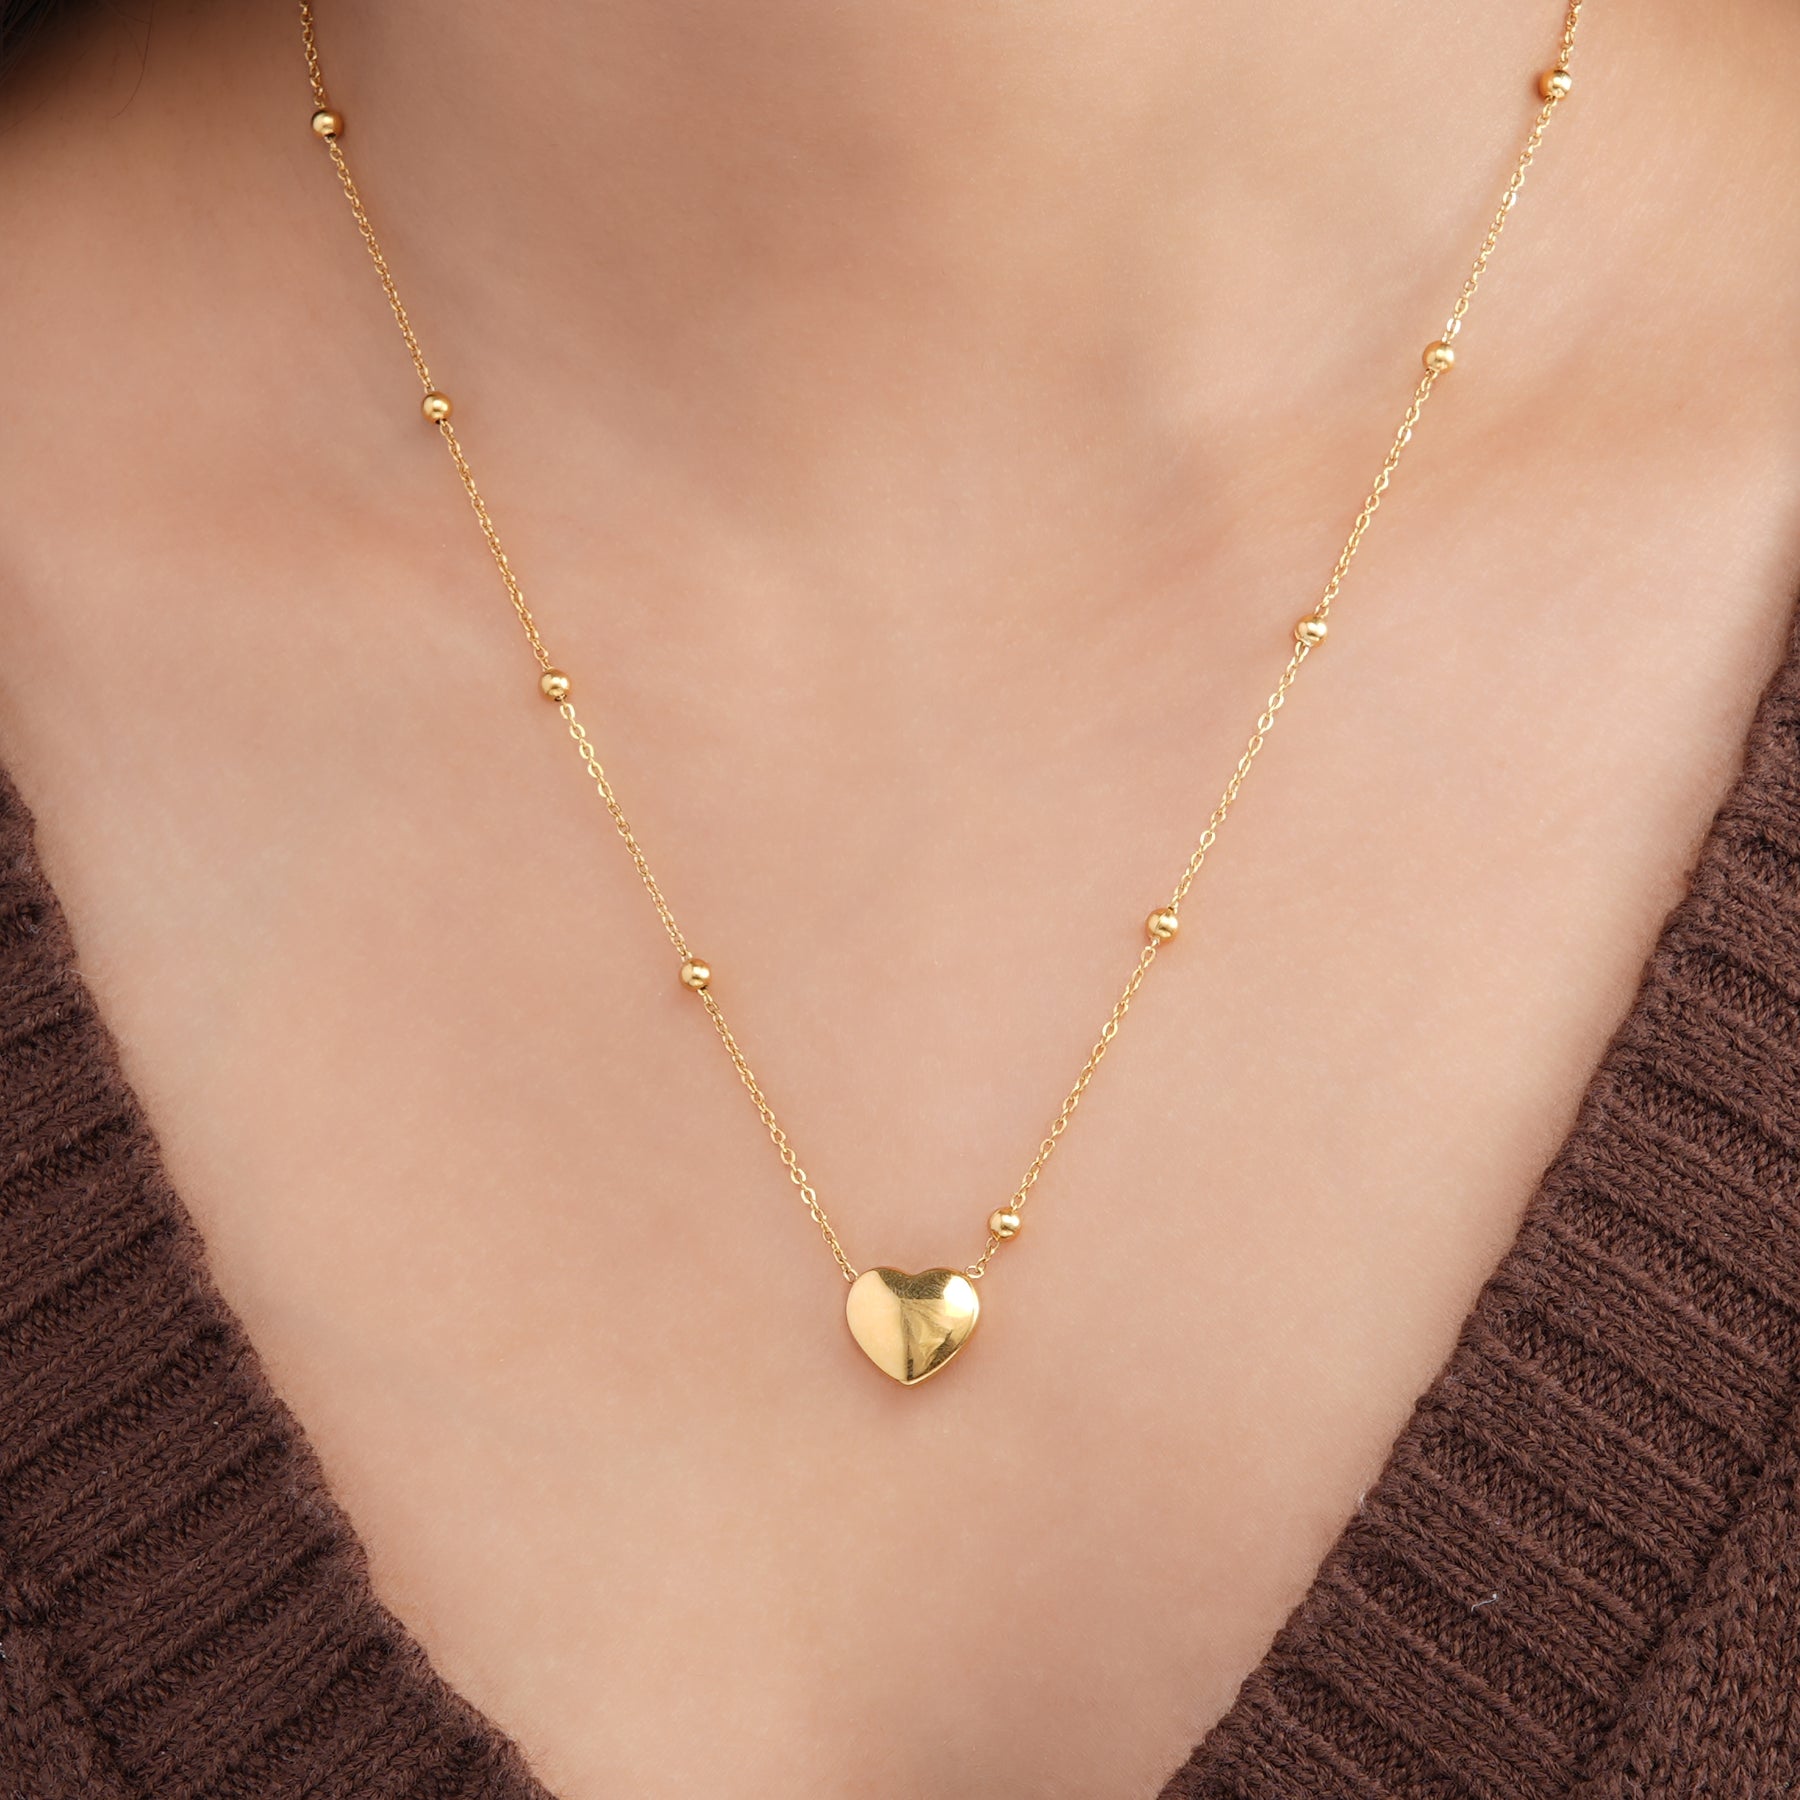 Puffy Heart Toggle Necklace (silver or gold) – Erin McDermott Jewelry